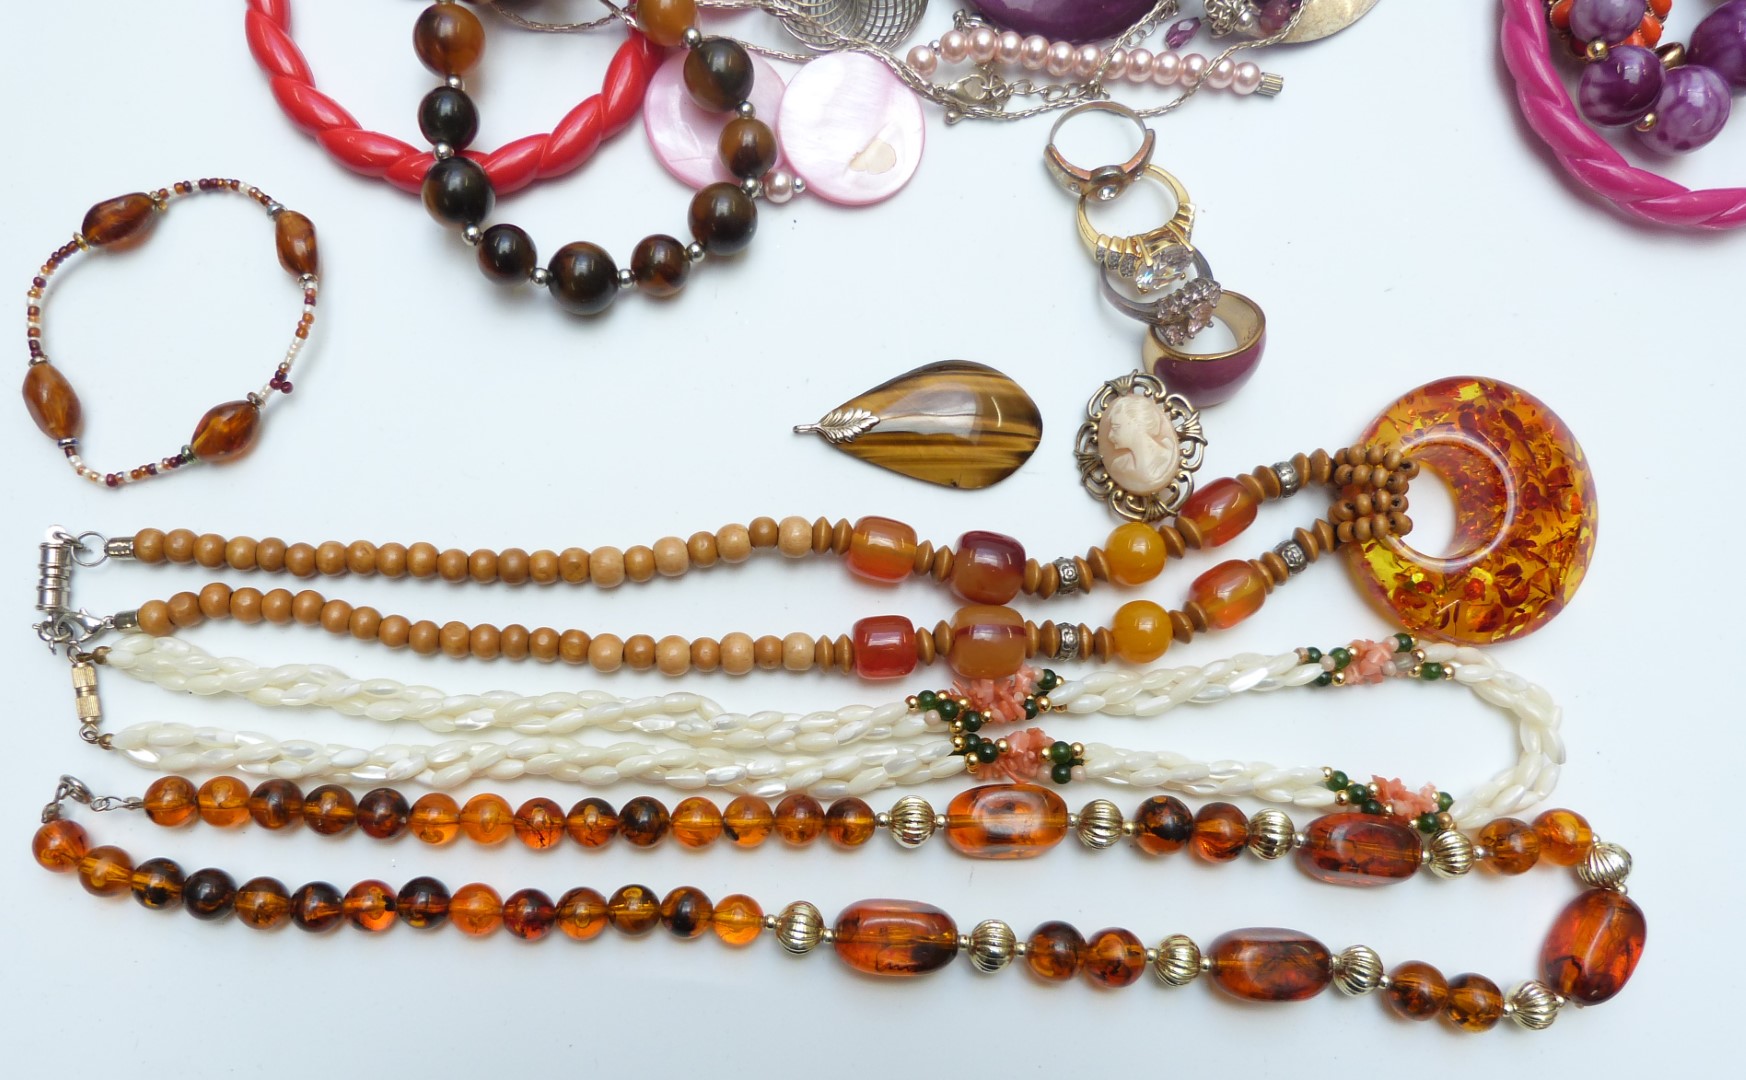 A collection of costume jewellery including beads, mother of pearl necklace, tiger's eye pendant, - Image 2 of 2